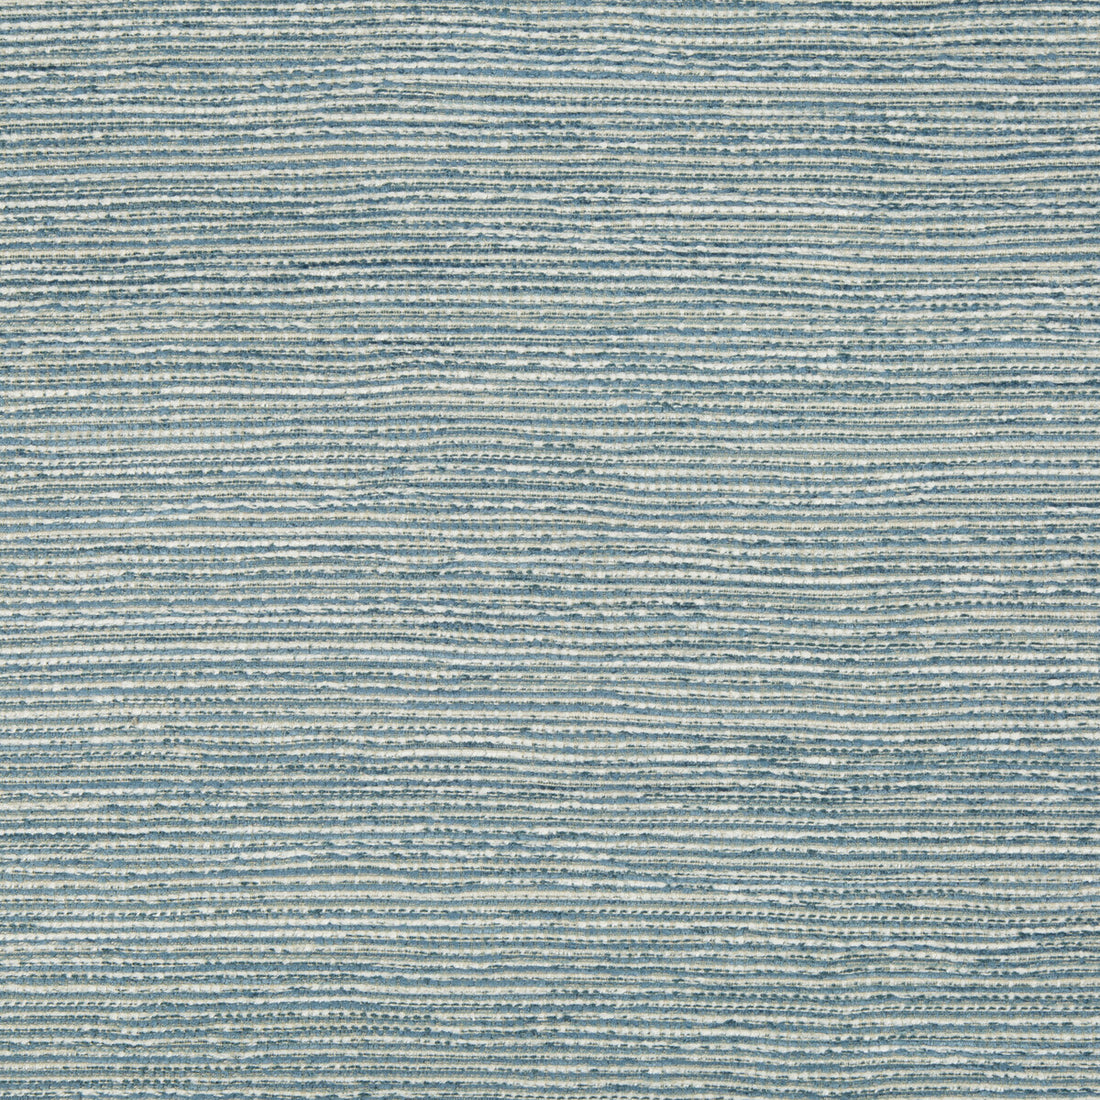 Kravet Design fabric in 34696-505 color - pattern 34696.505.0 - by Kravet Design in the Crypton Home collection